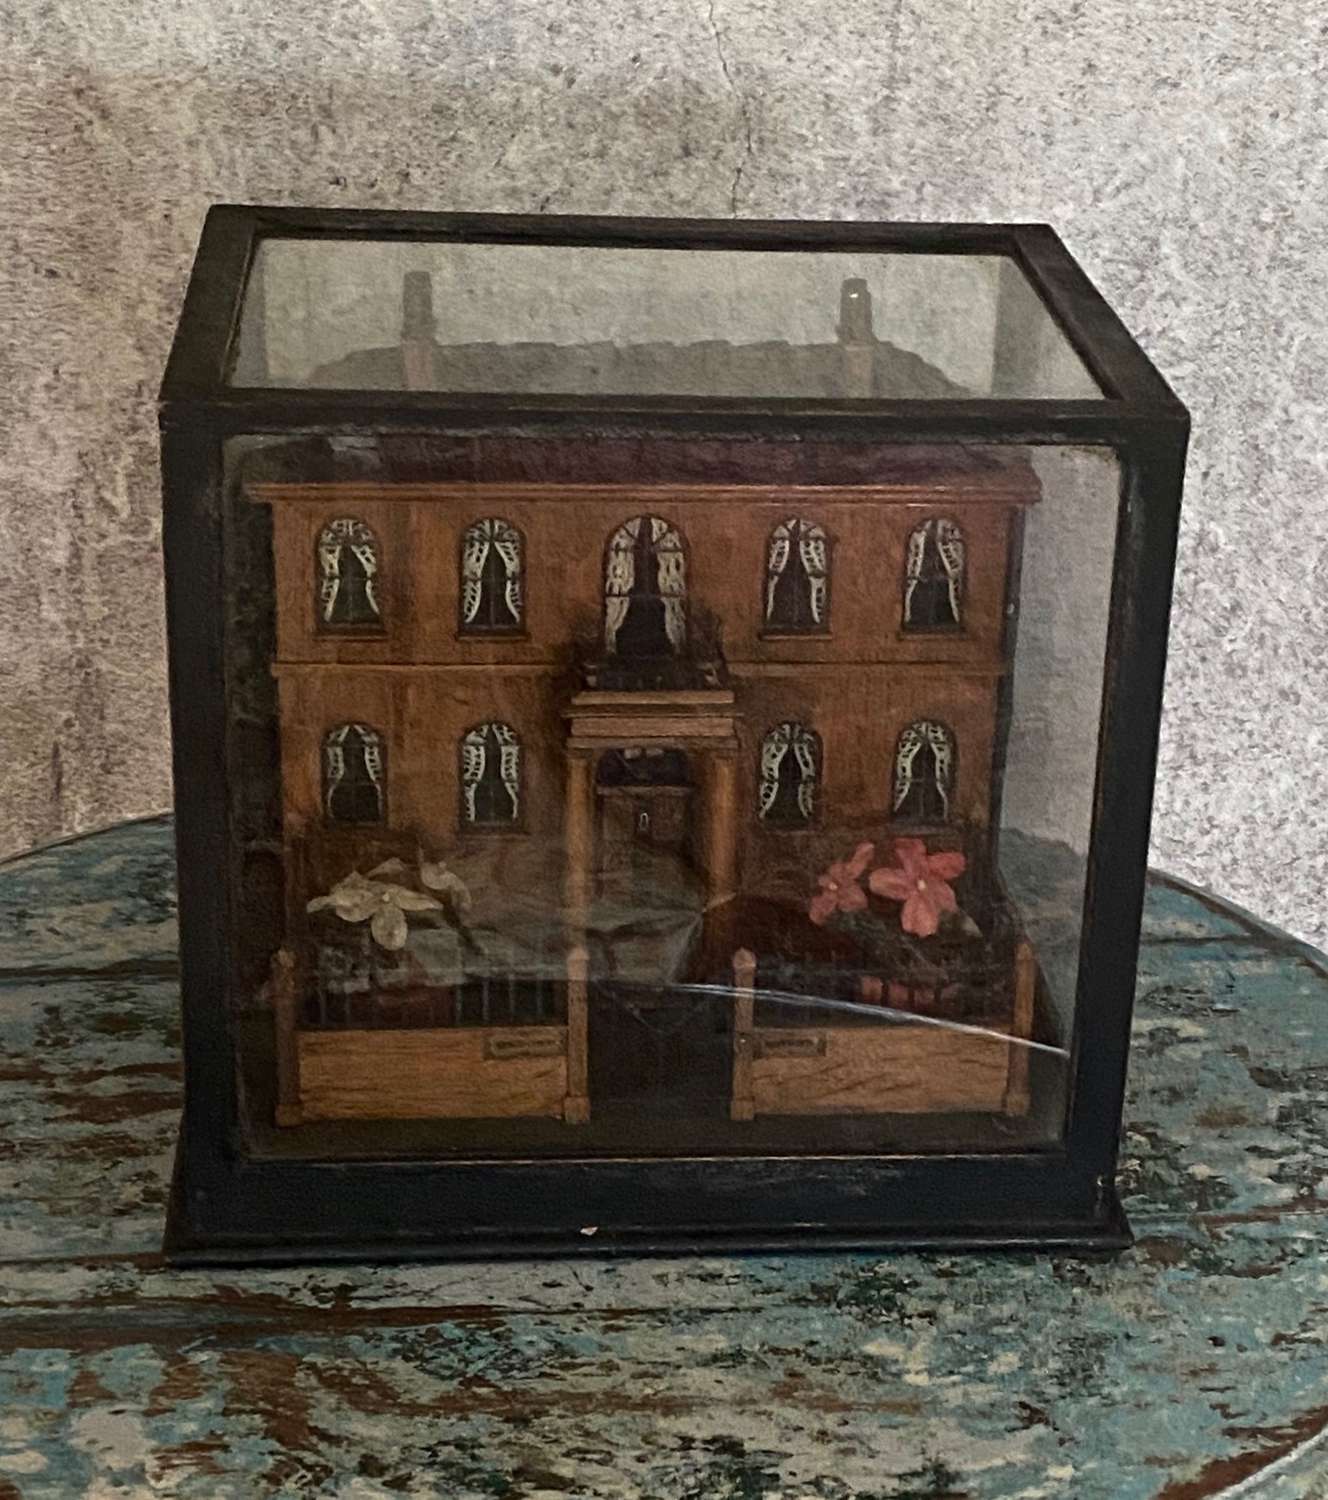 Amazing 19th century house diorama depicting a house and garden